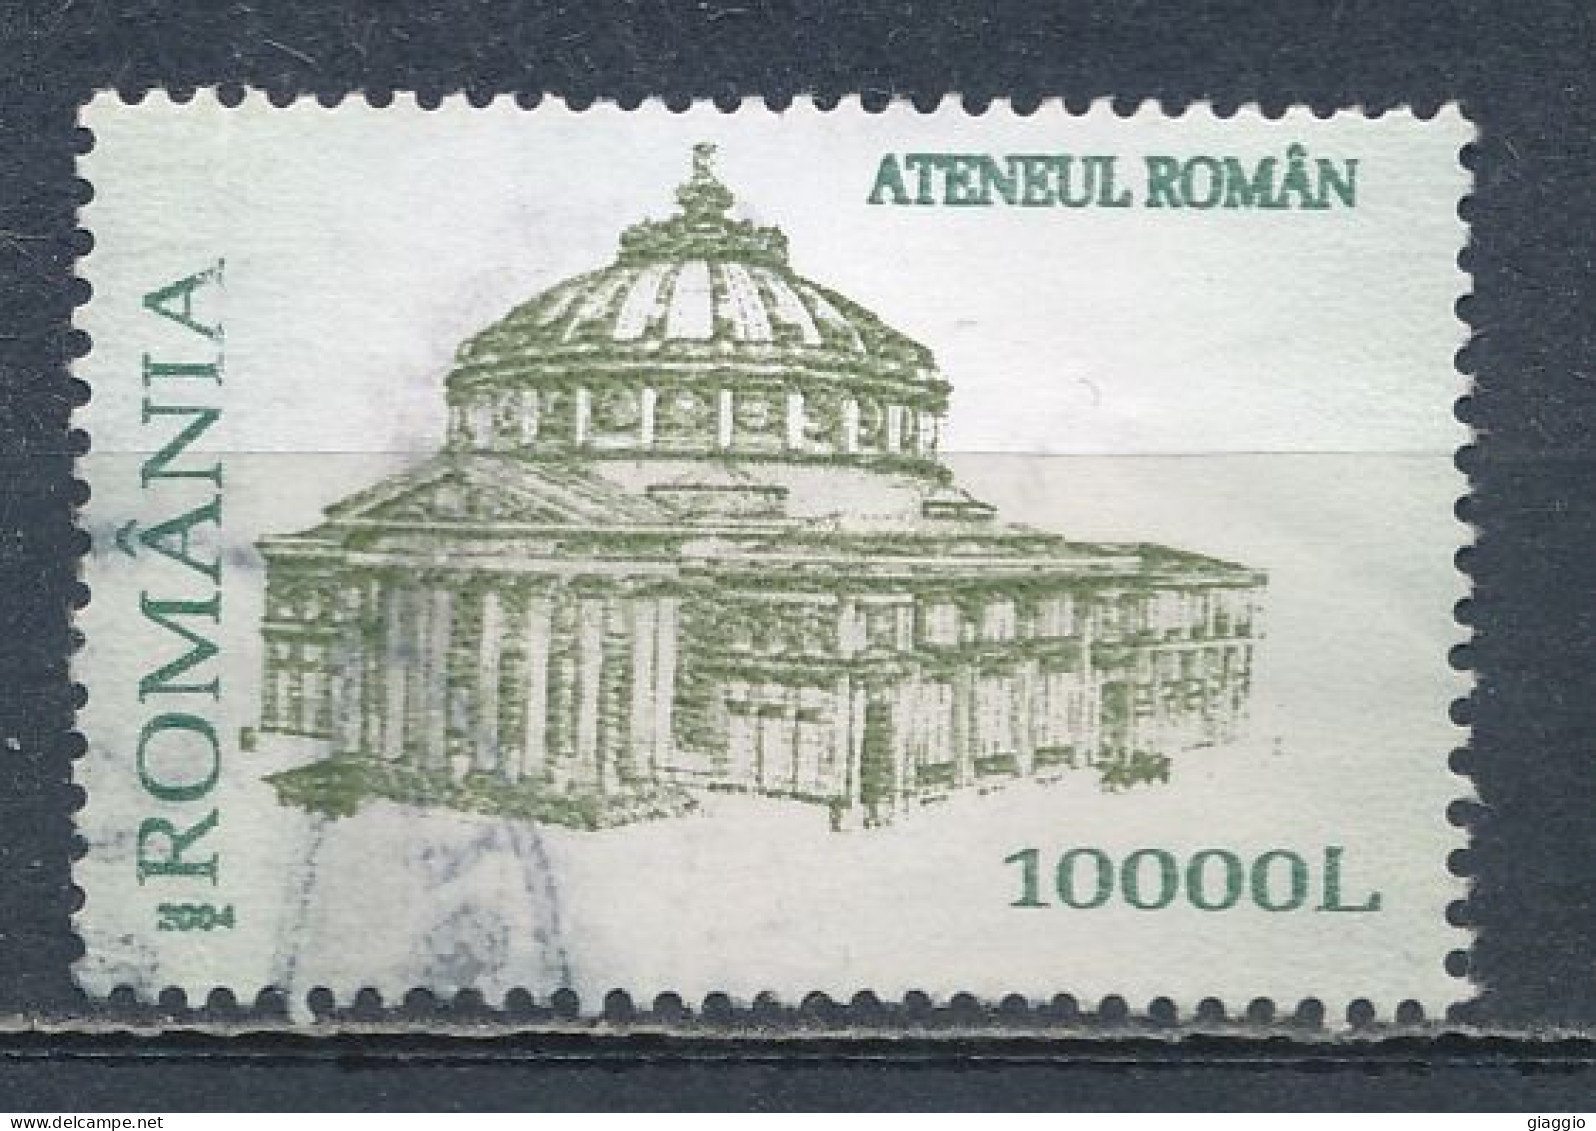 °°° ROMANIA - Y&T N° 4893 - 2004 °°° - Used Stamps